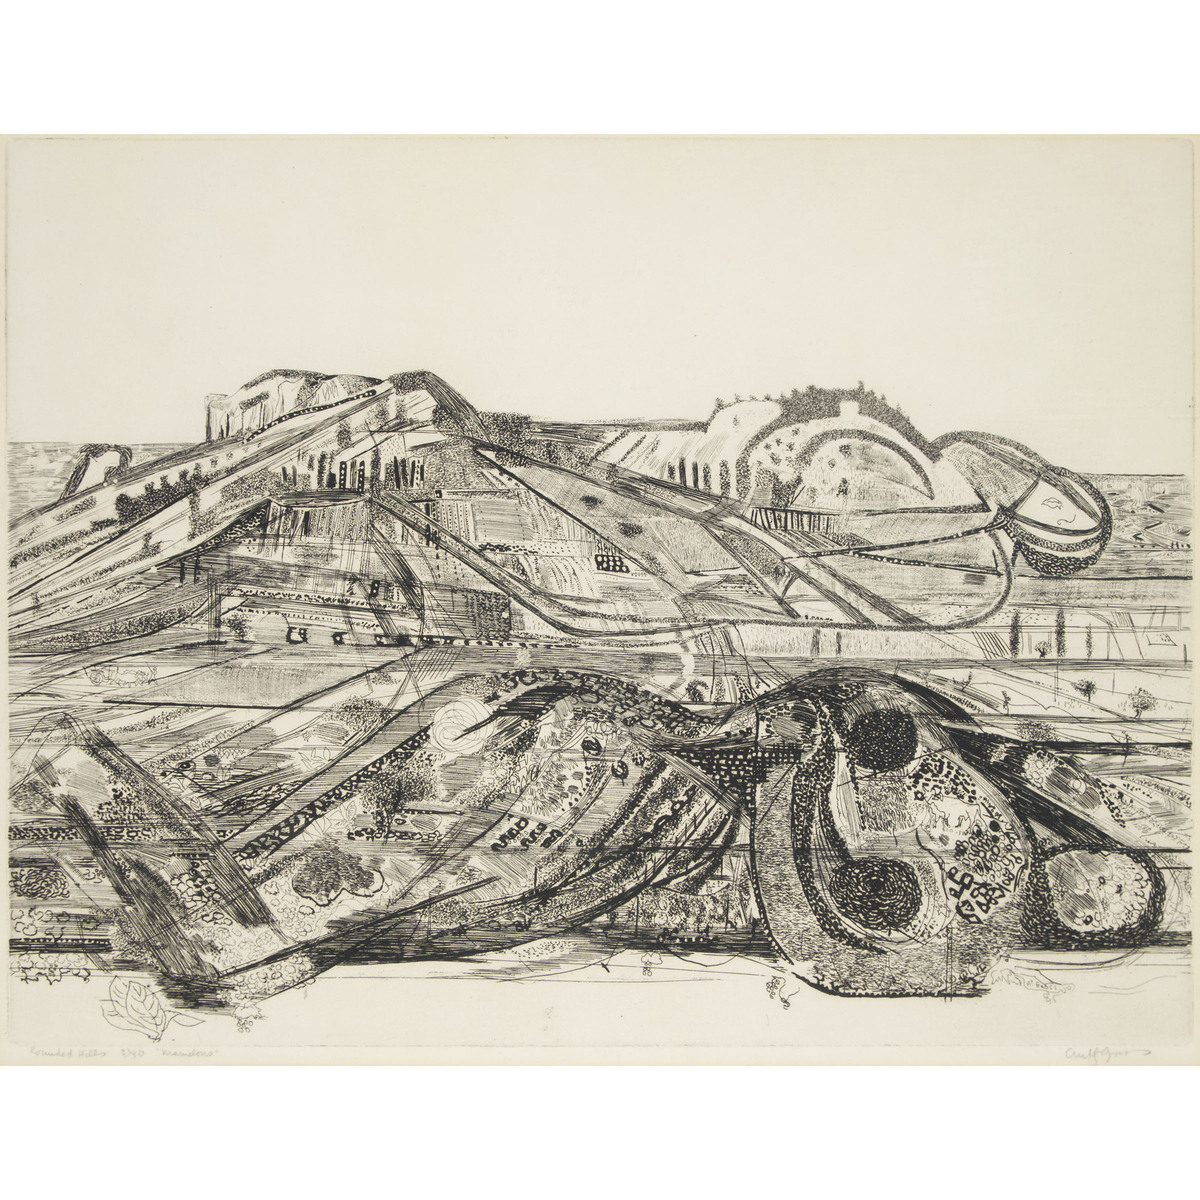 Anthony Gross (1905-1984), LES MAMELONS (ROUNDED HILLS), 1962, signed, titled, and numbered 21/50; t